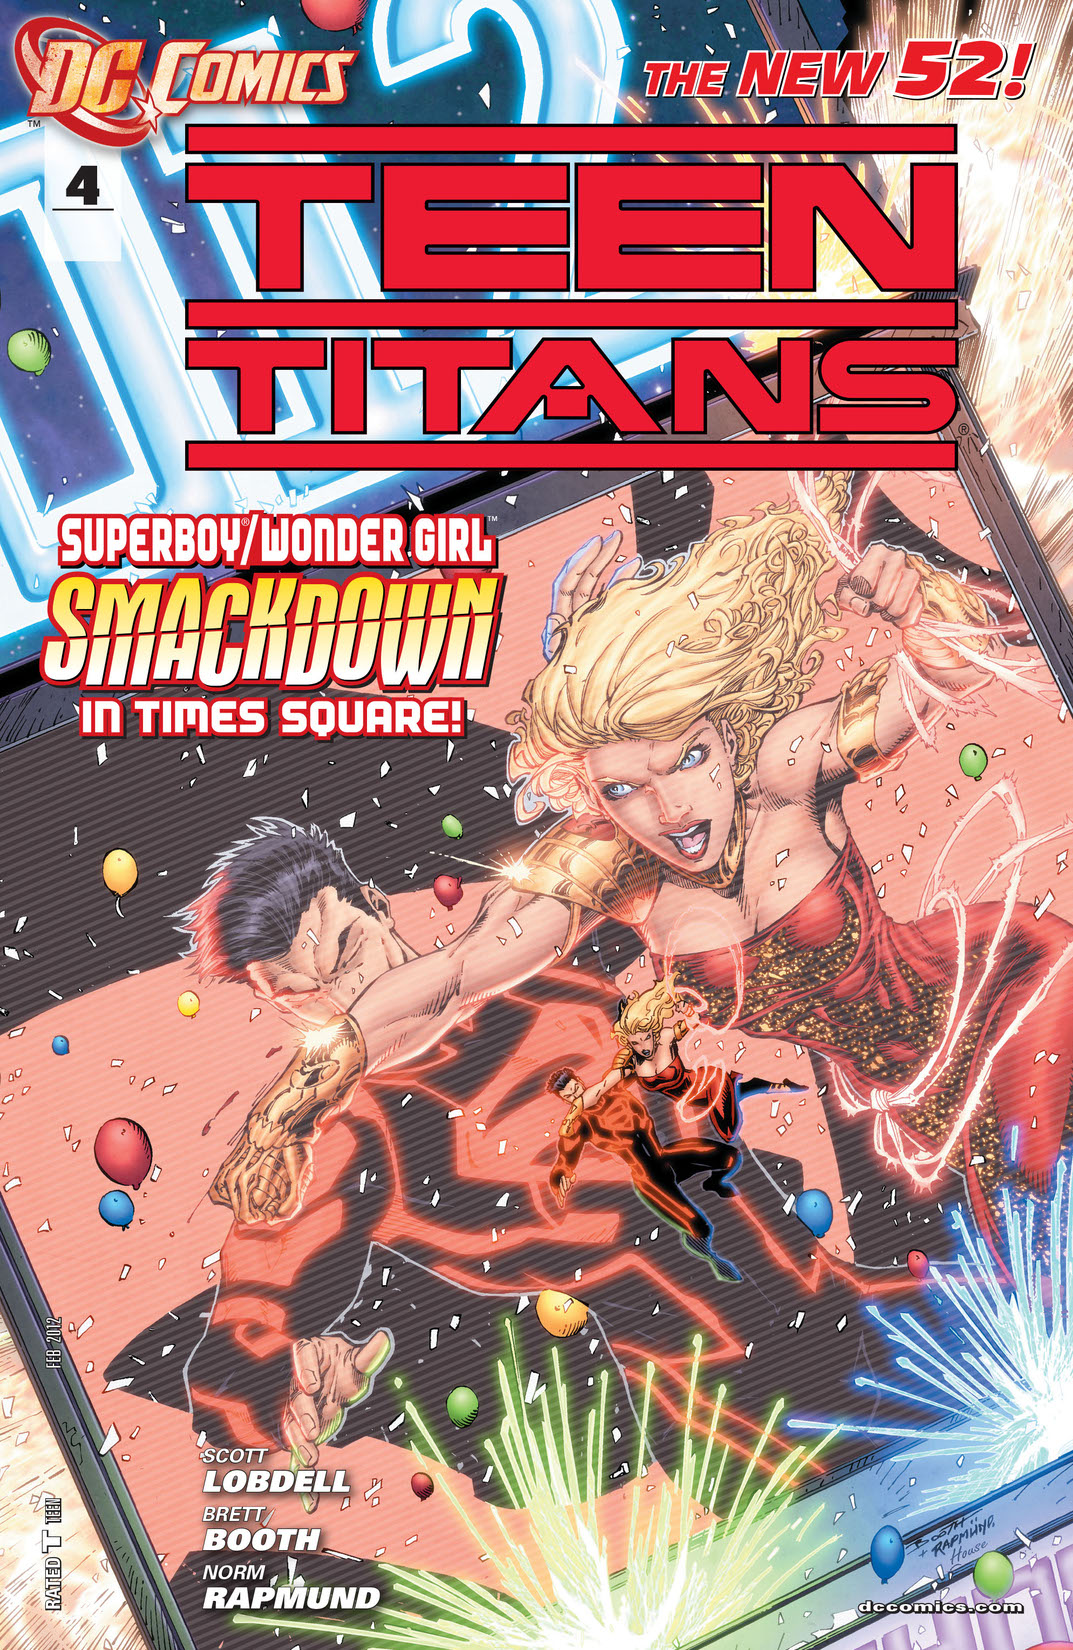 Teen Titans (2011-) #4 preview images